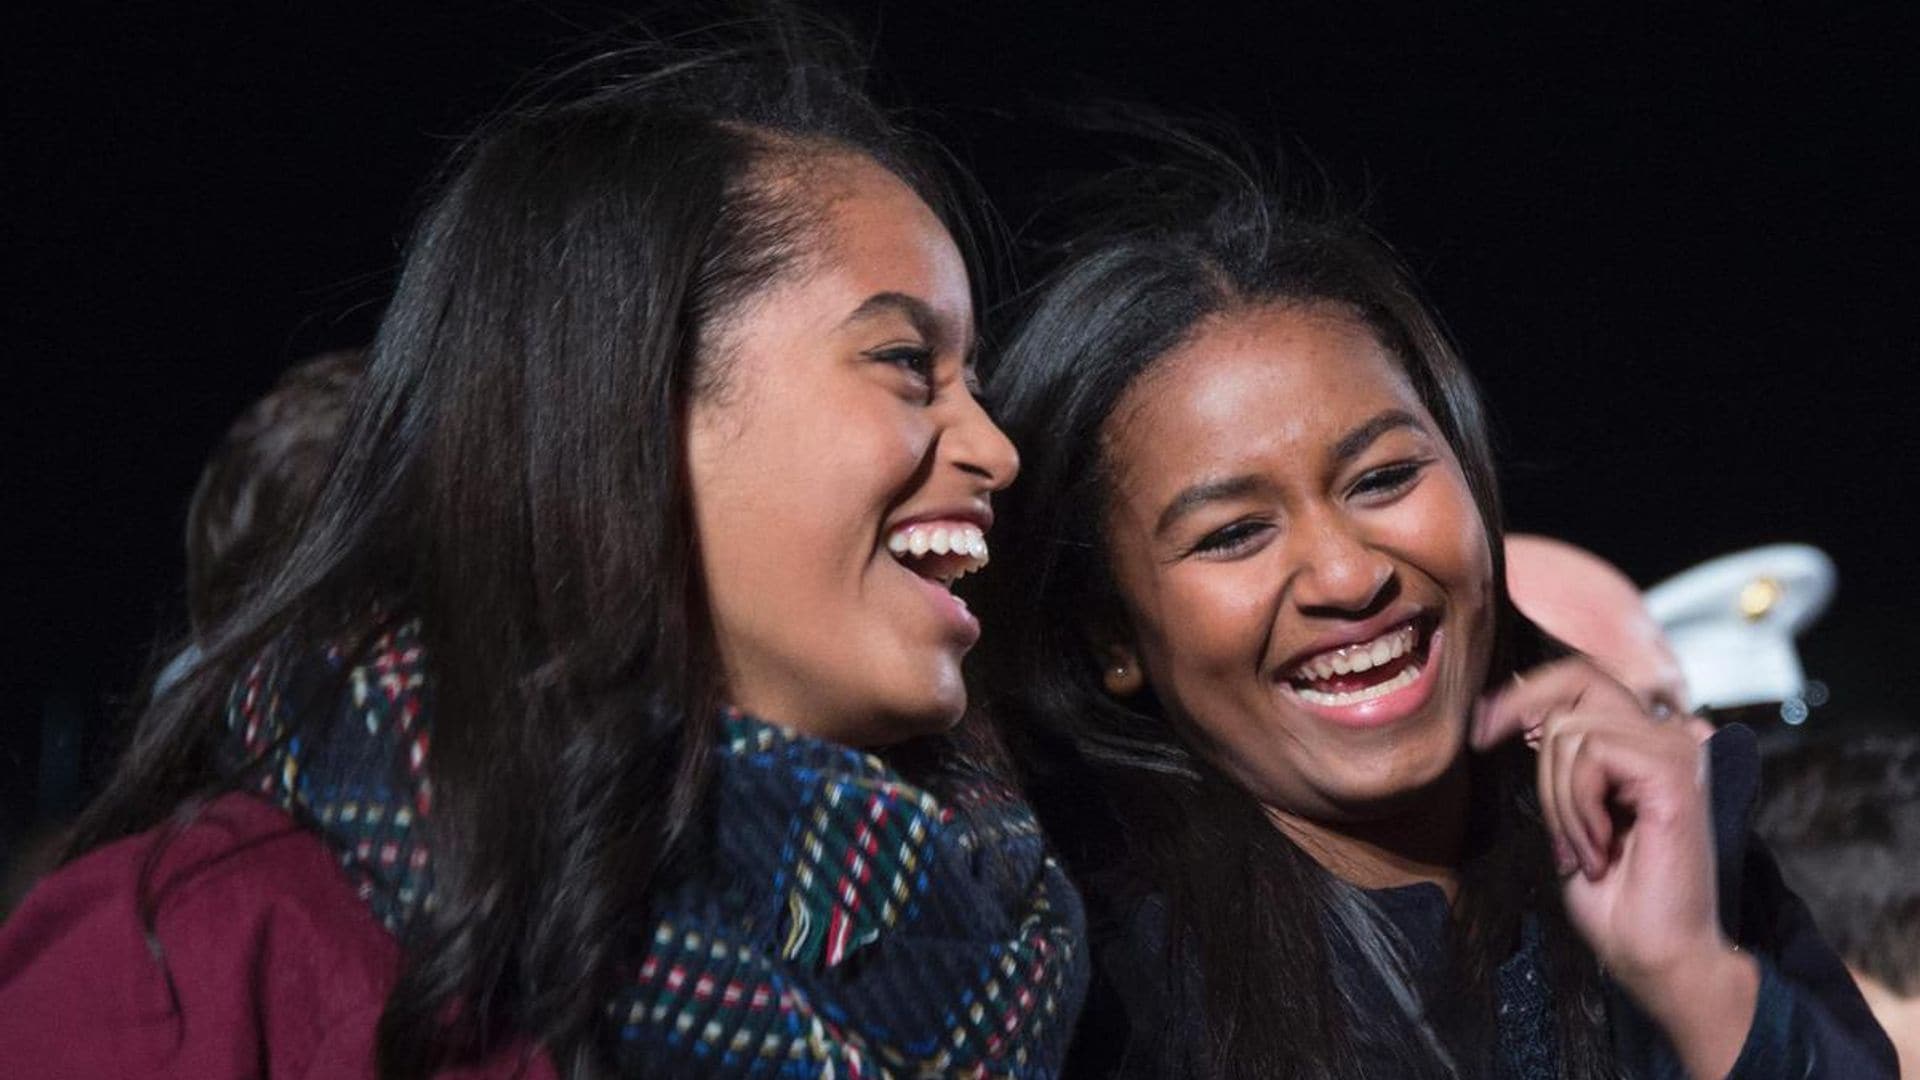 Sasha and Malia Obama show their happy dance at LAX after reuniting